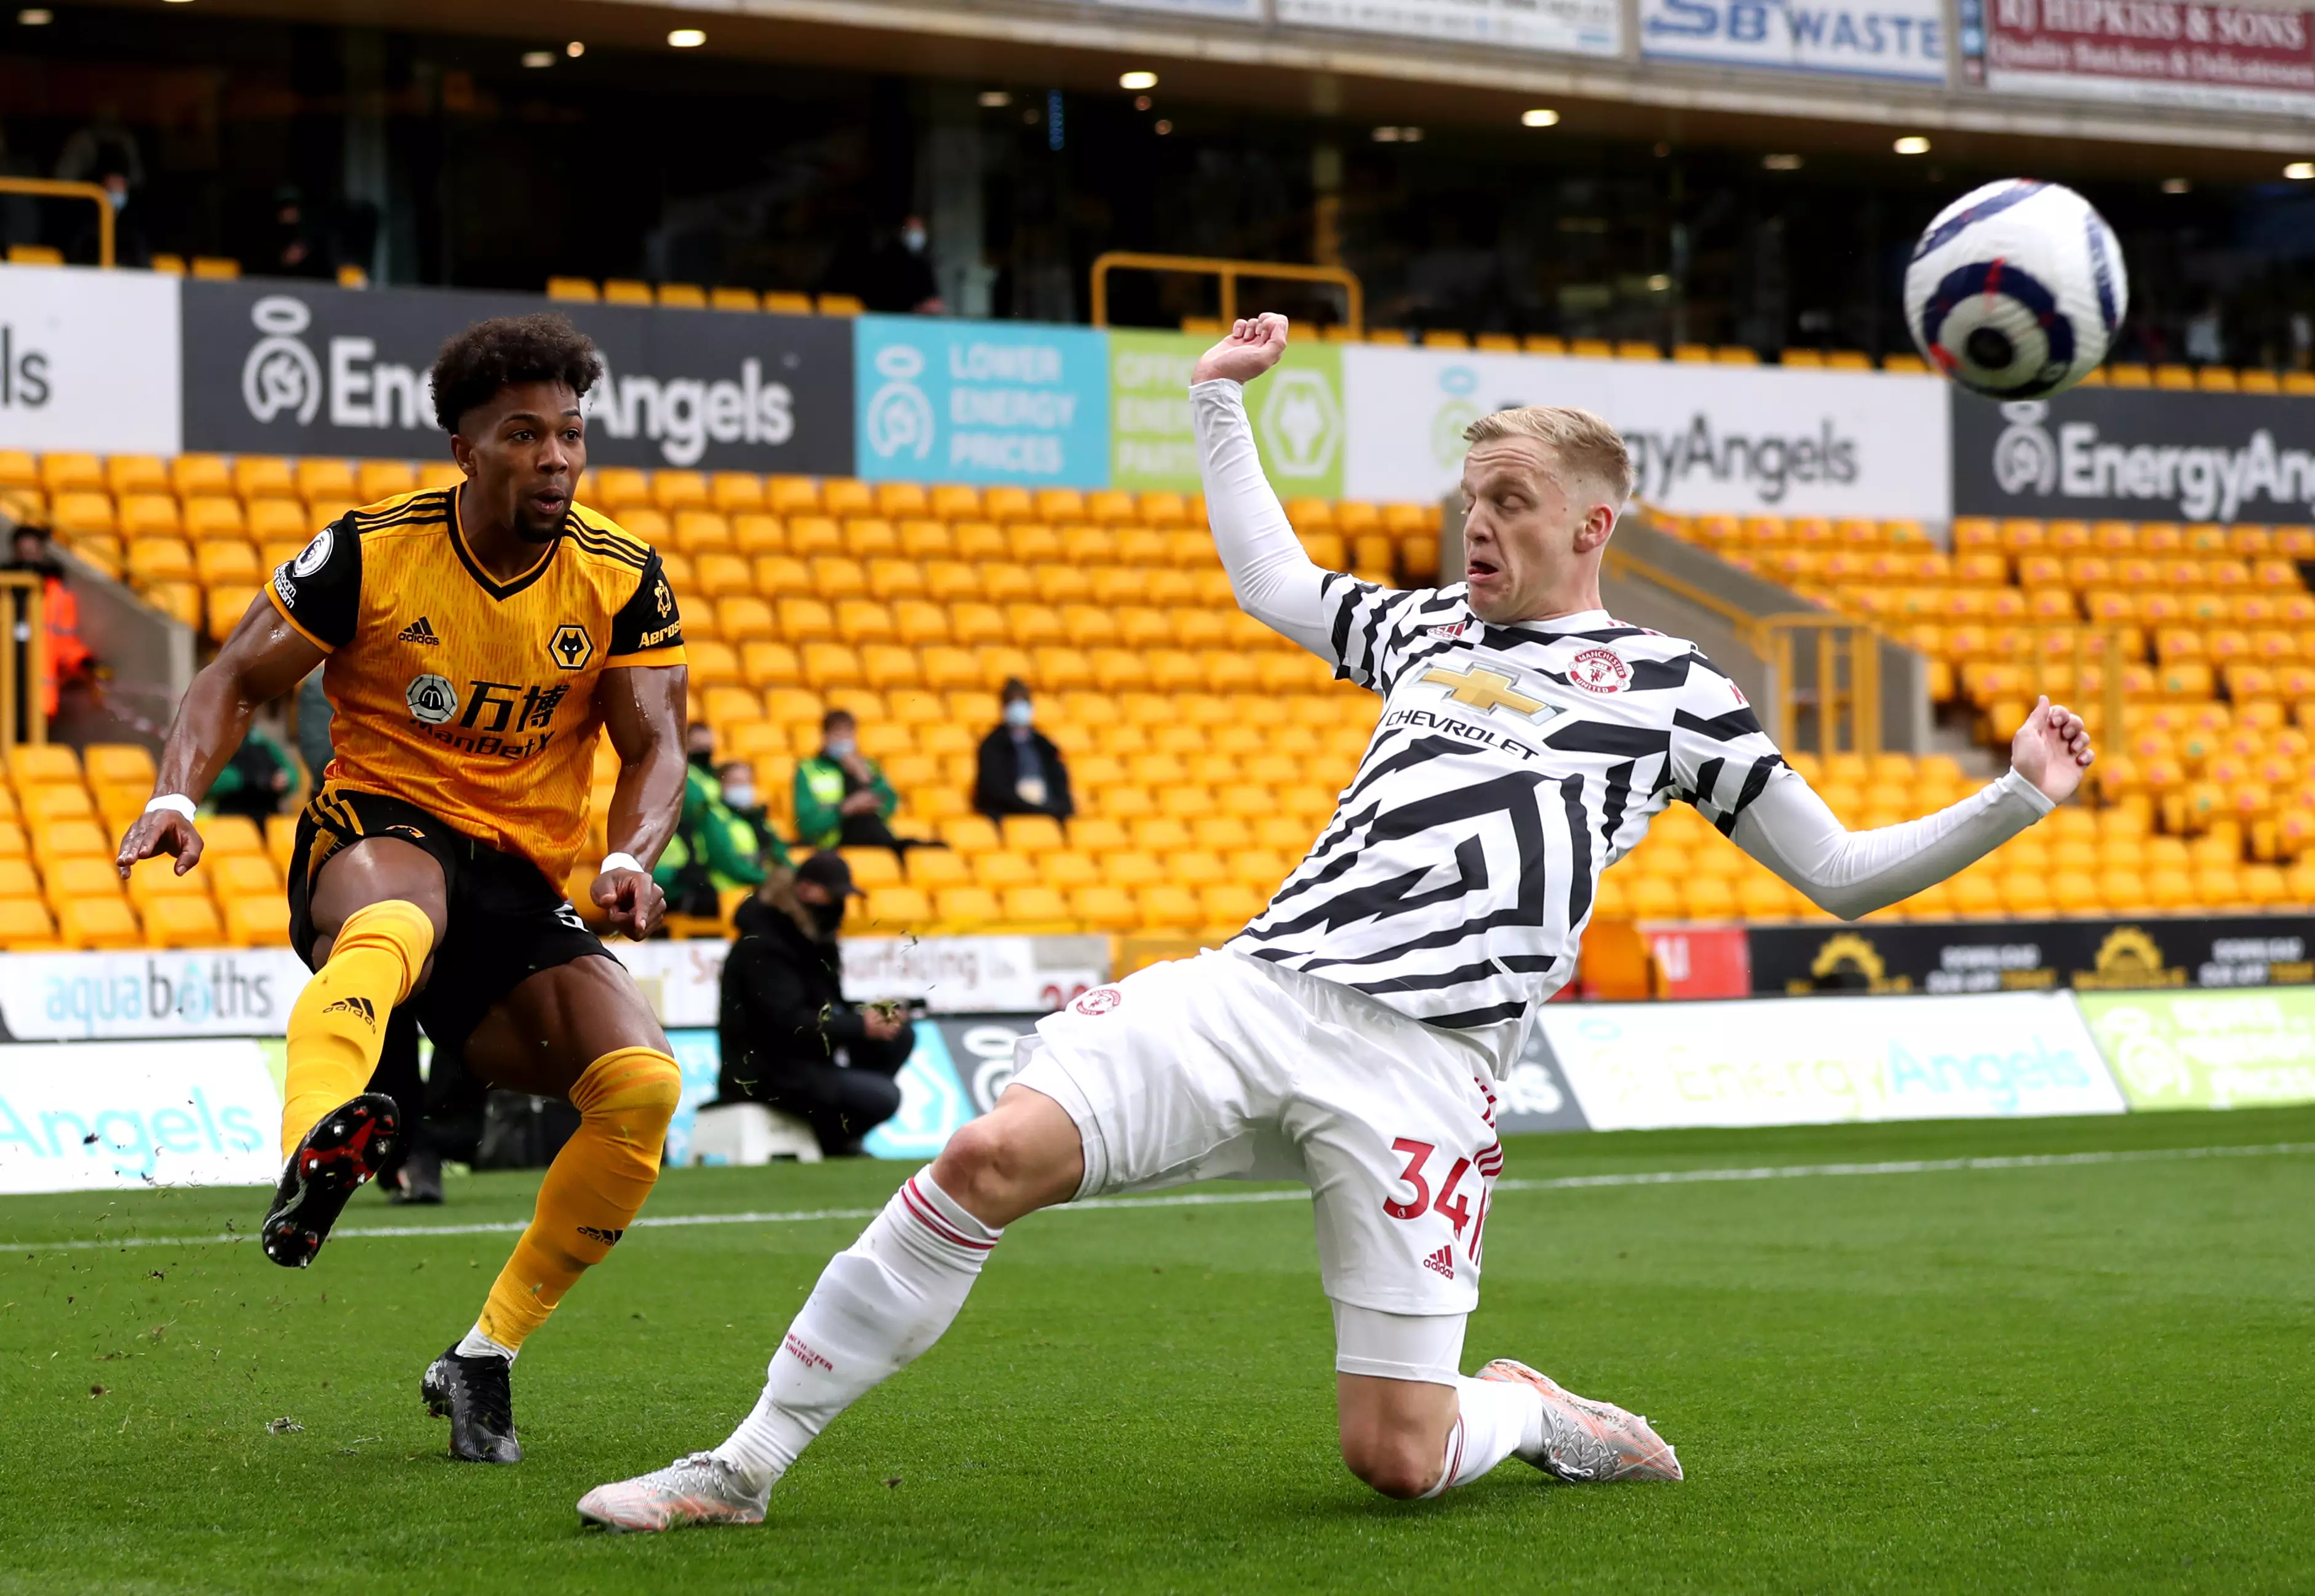 Van de Beek made a rare appearance on the final day of the league season vs Wolves. Image: PA Images